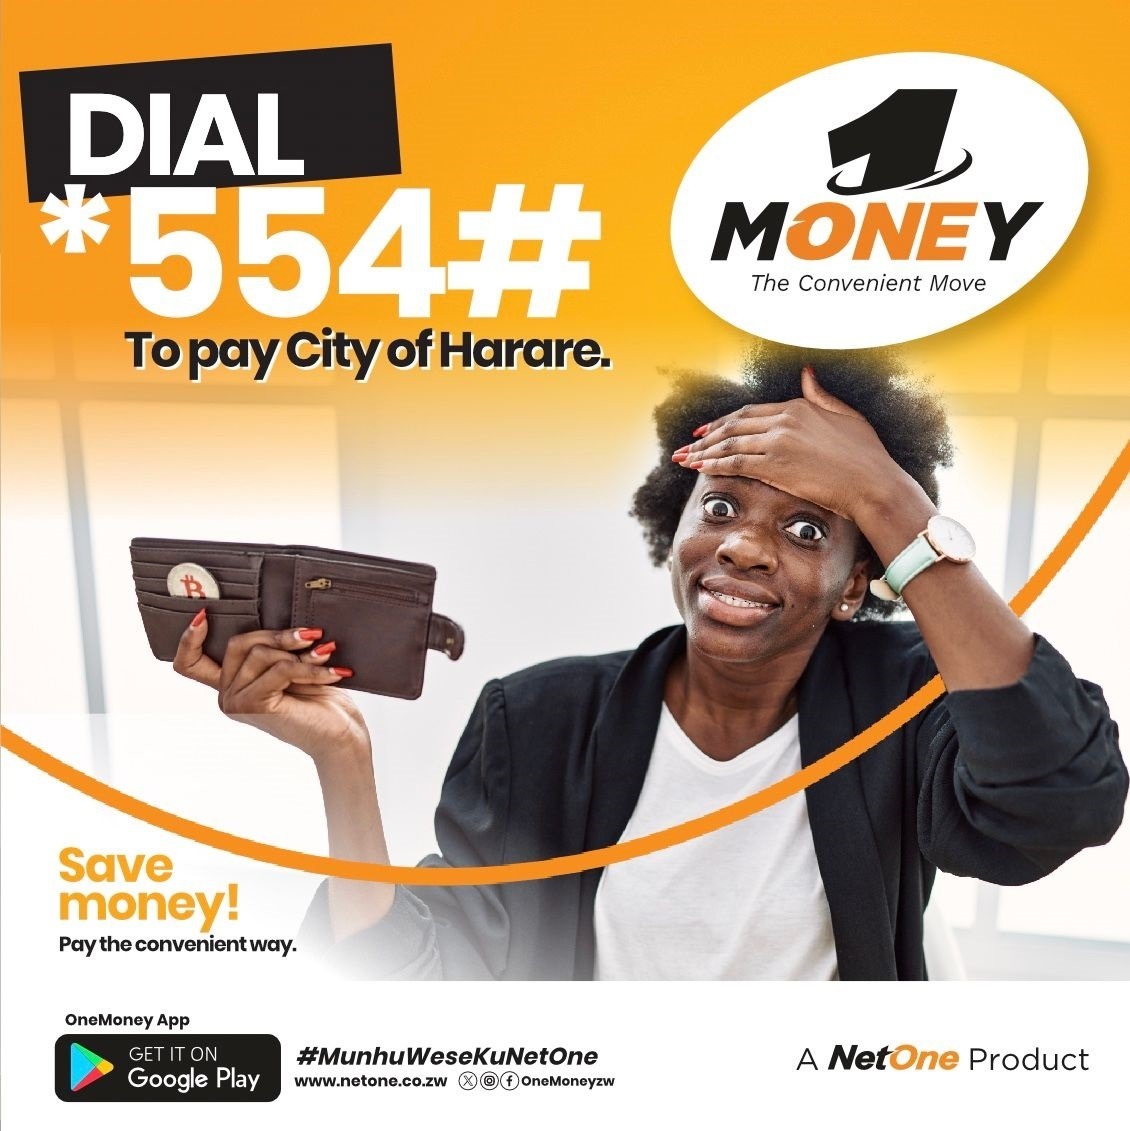 As we approach the end of the month, do not forget to settle your City of Harare payments conveniently using OneMoney. Dial *554# and enjoy the convenience of easy payments at your fingertips. #OneMoney #CityOfHarare